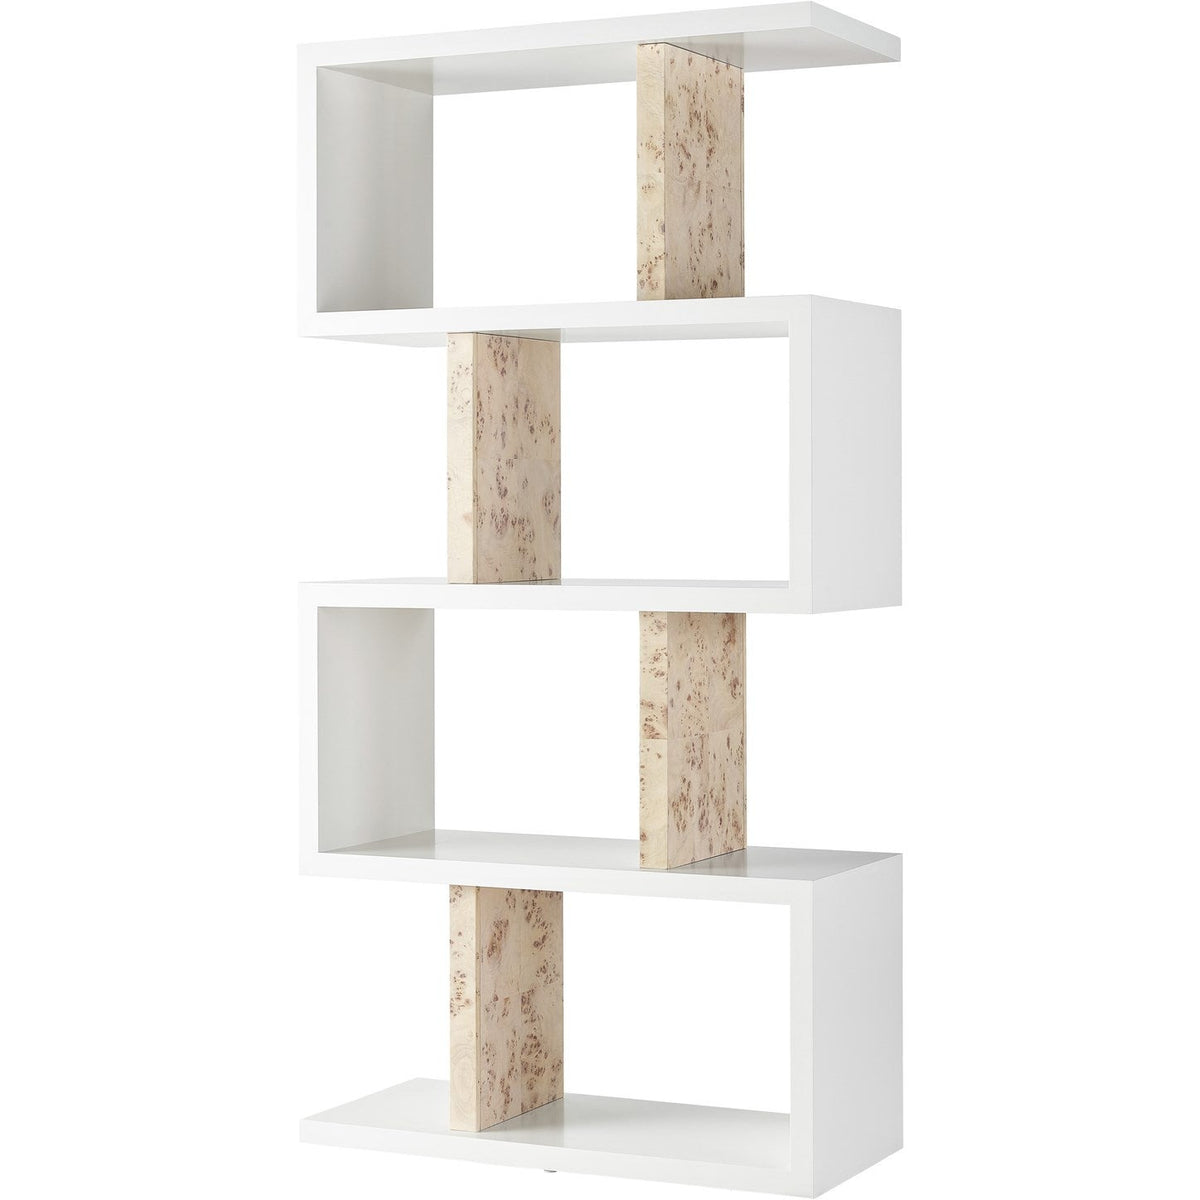 Poise Etagere - Be Bold Furniture